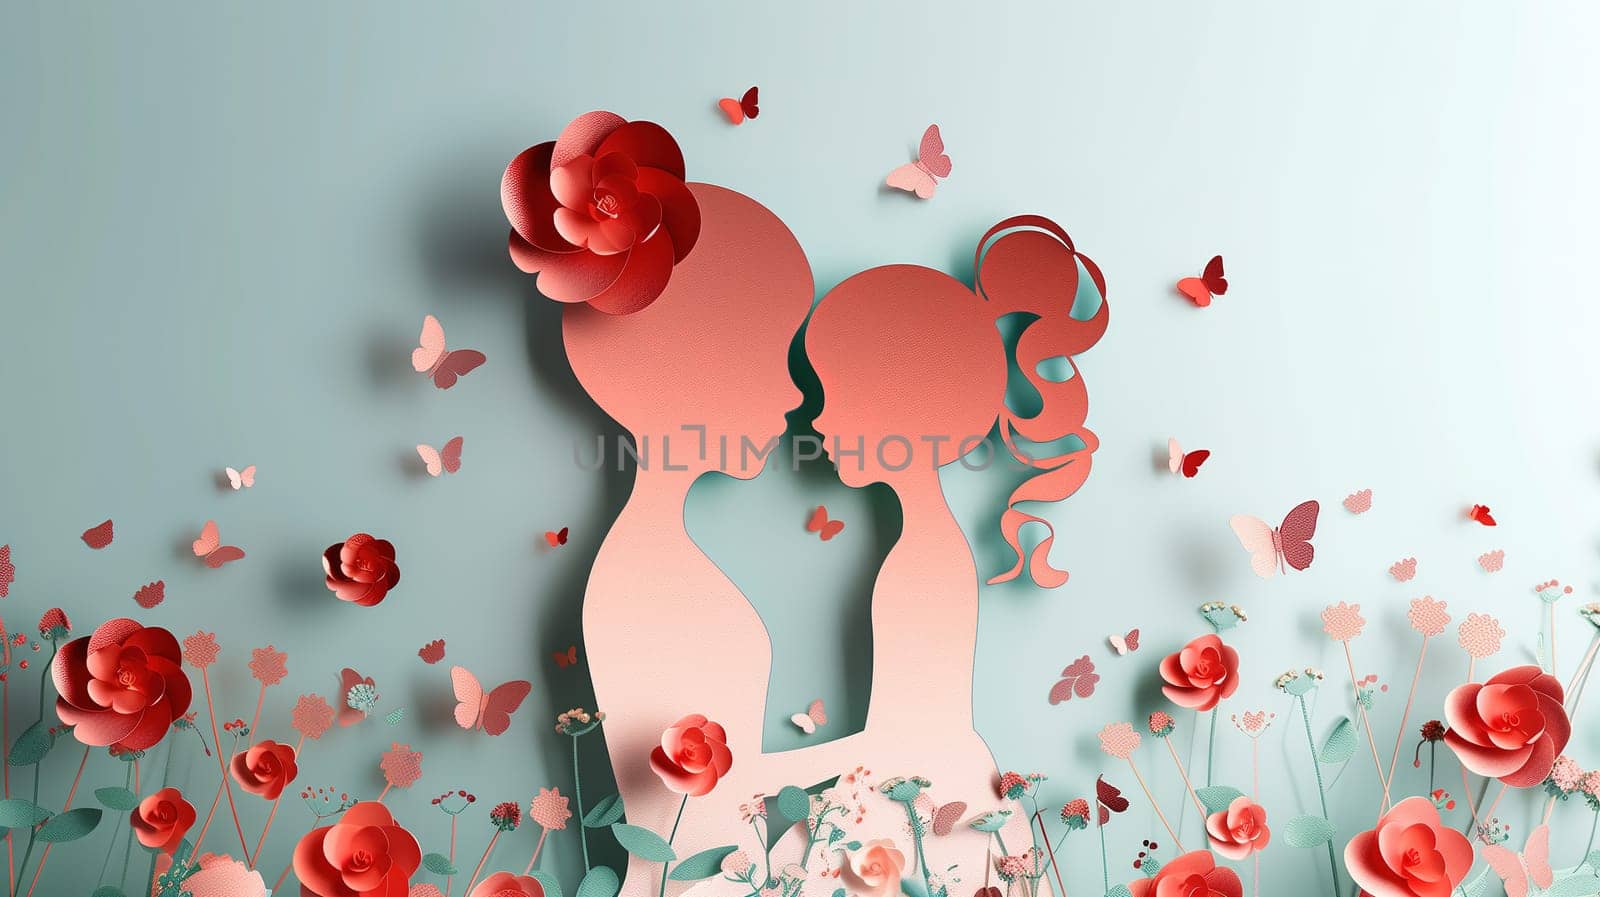 A paper cut showing a couple kissing passionately in a lush field of colorful flowers. The intricate design captures the intimacy and beauty of the moment.